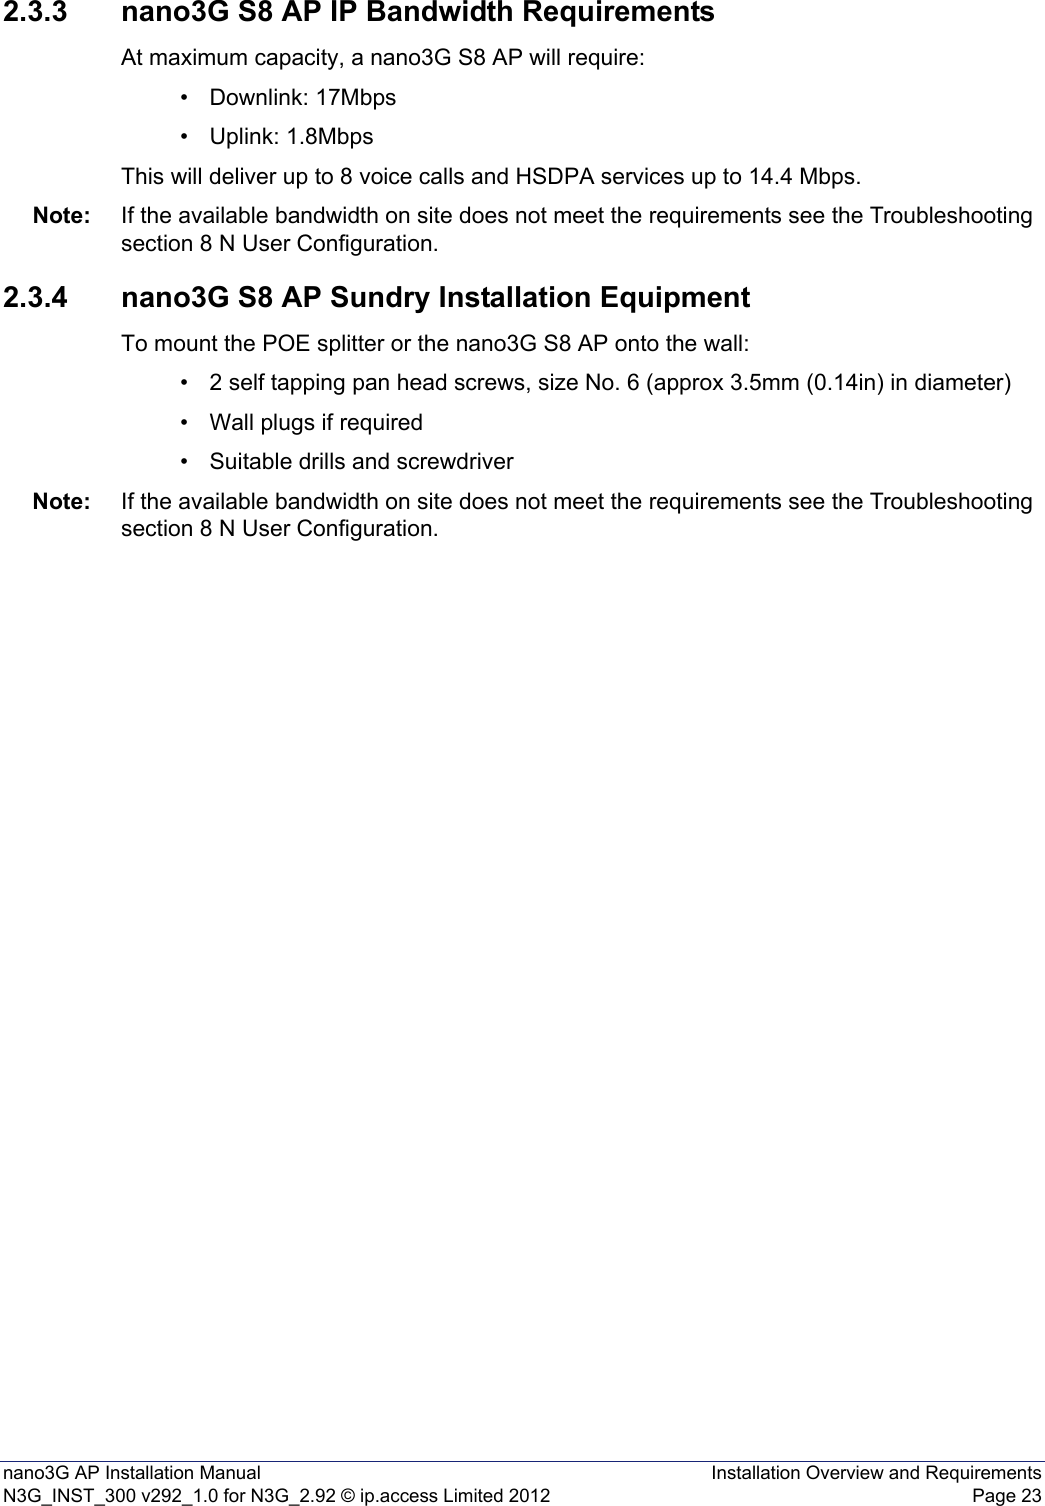 nano3G AP Installation Manual Installation Overview and RequirementsN3G_INST_300 v292_1.0 for N3G_2.92 © ip.access Limited 2012 Page 232.3.3 nano3G S8 AP IP Bandwidth RequirementsAt maximum capacity, a nano3G S8 AP will require:• Downlink: 17Mbps• Uplink: 1.8MbpsThis will deliver up to 8 voice calls and HSDPA services up to 14.4 Mbps.Note: If the available bandwidth on site does not meet the requirements see the Troubleshooting section 8 N User Configuration.2.3.4 nano3G S8 AP Sundry Installation EquipmentTo mount the POE splitter or the nano3G S8 AP onto the wall:• 2 self tapping pan head screws, size No. 6 (approx 3.5mm (0.14in) in diameter)• Wall plugs if required• Suitable drills and screwdriverNote: If the available bandwidth on site does not meet the requirements see the Troubleshooting section 8 N User Configuration.